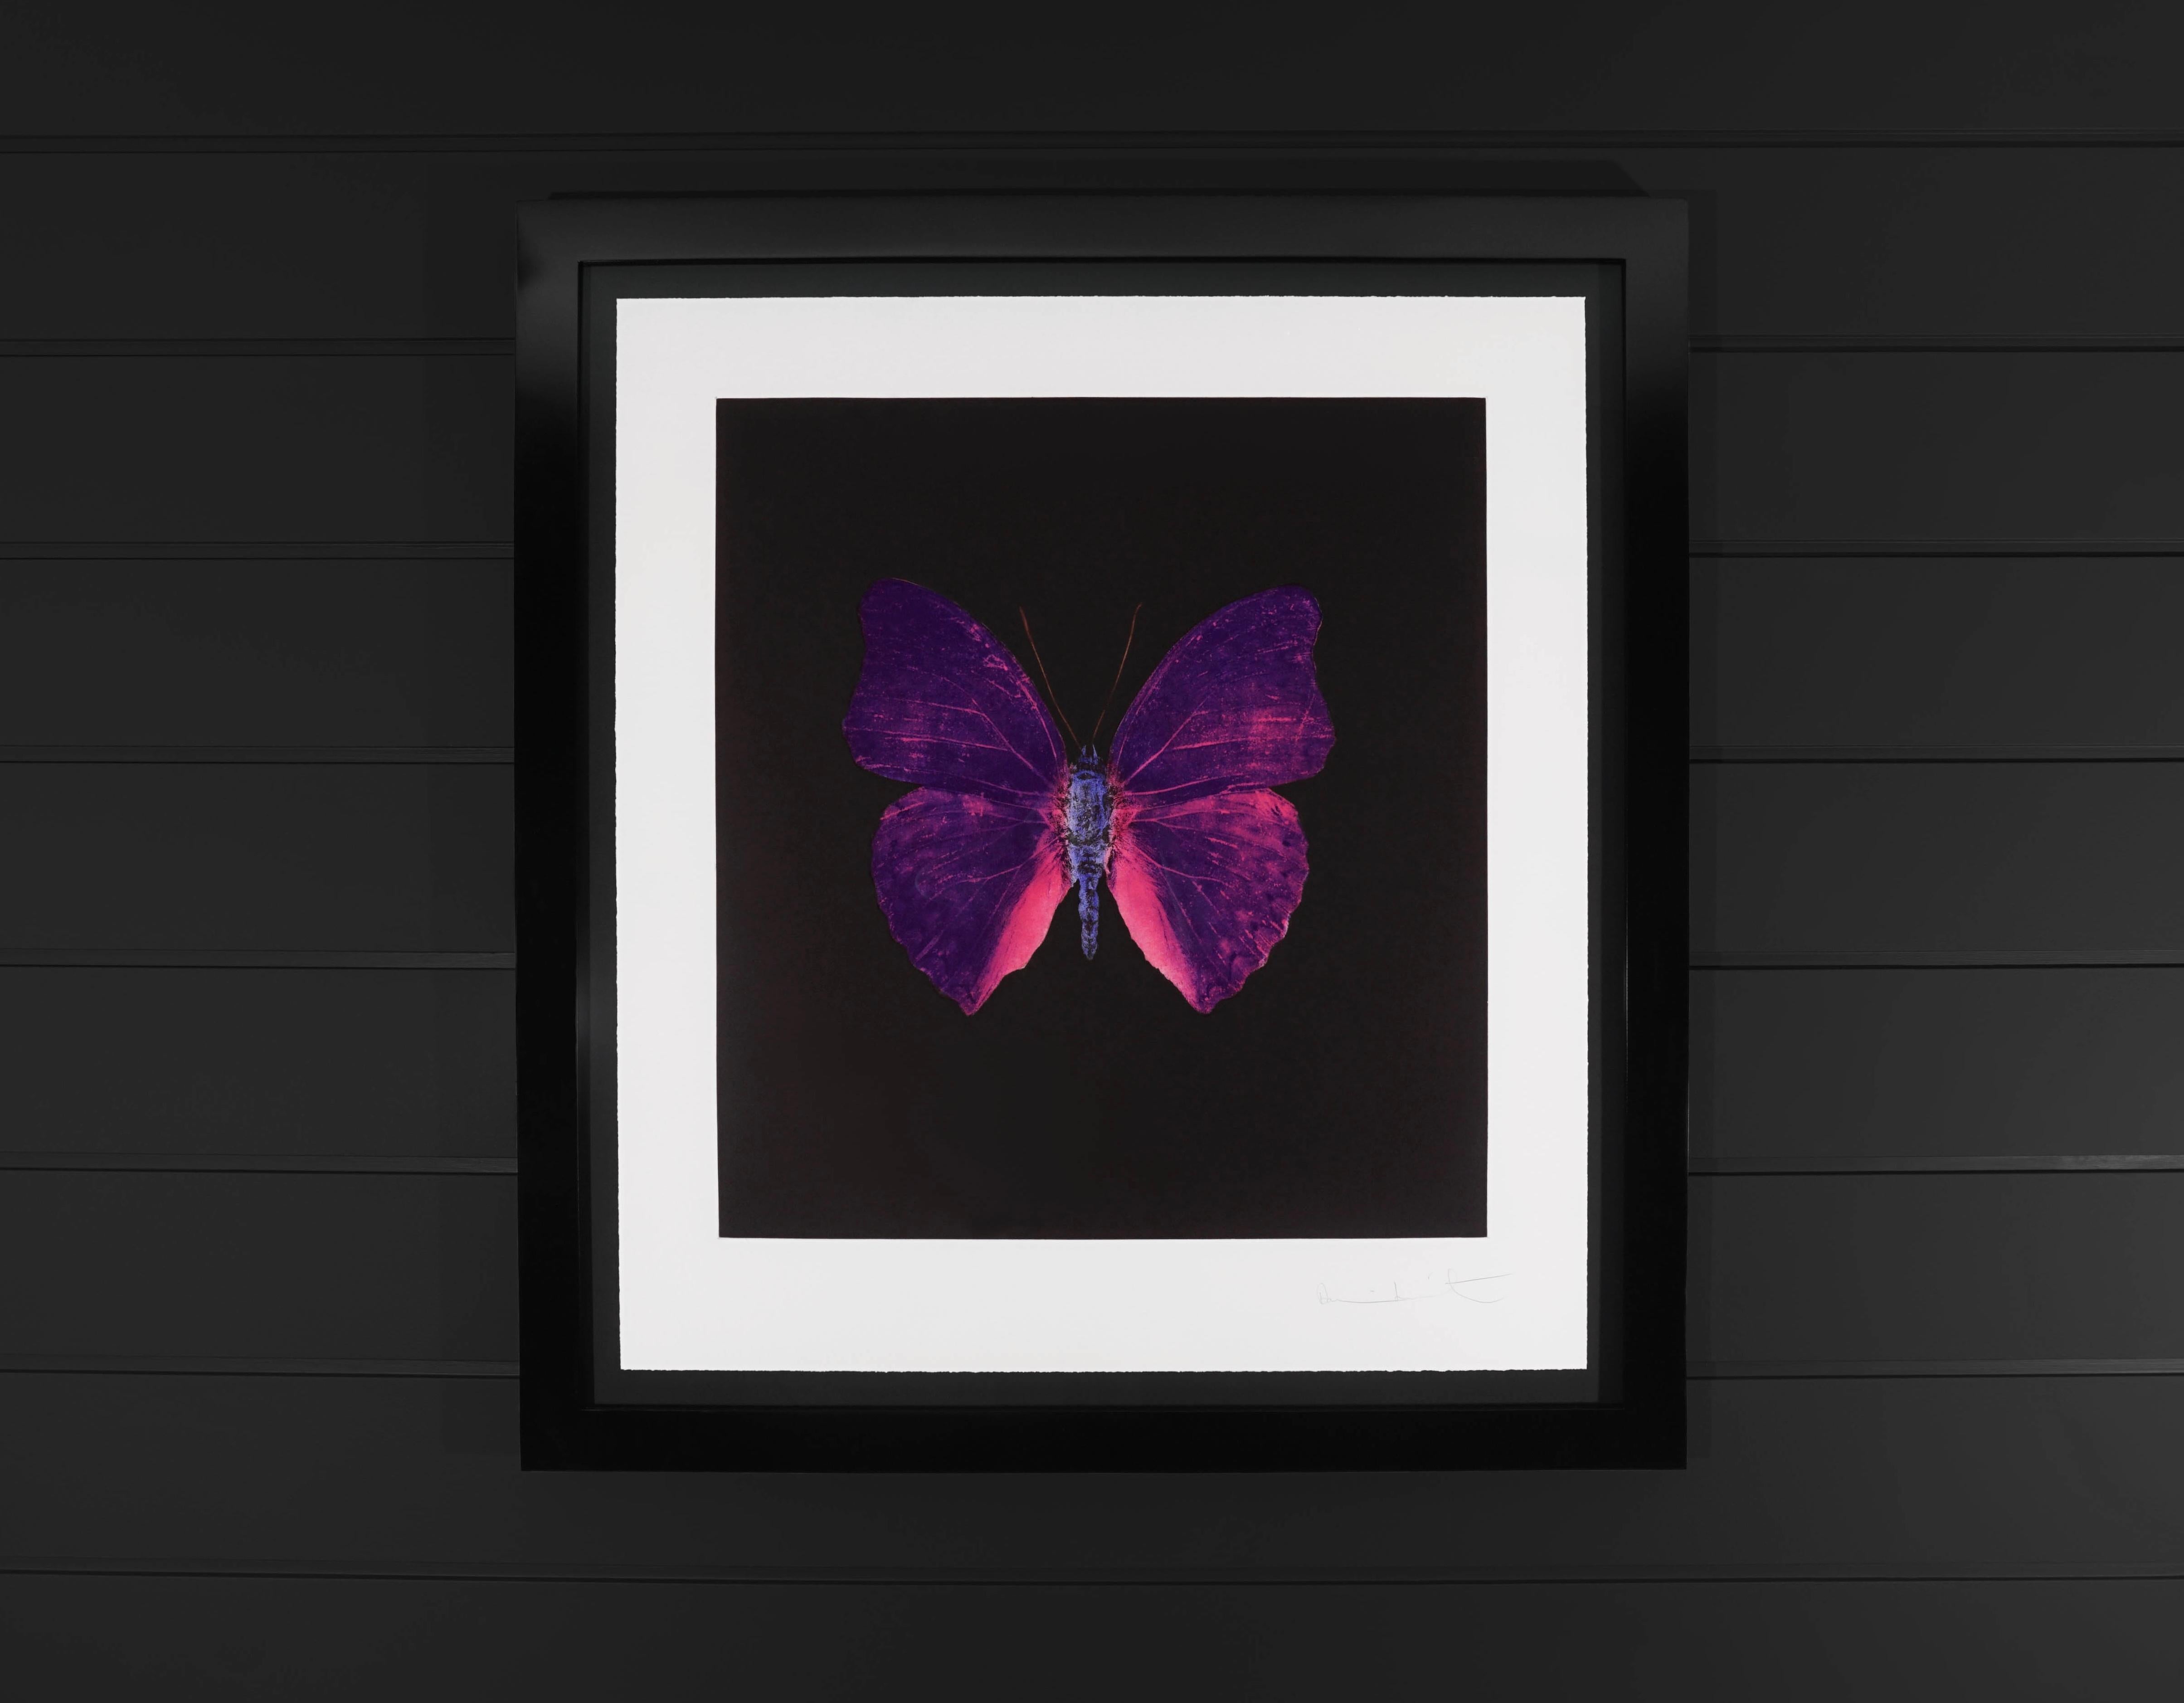 The Butterfly Souls in Violet by Damien Hirst is an etching on Velin Arches Paper. Created in 2007 as a part of a limited edition of only 72 in existence. The royal purple hue in combination with bubblegum pink is a vibrant combination, the pop of